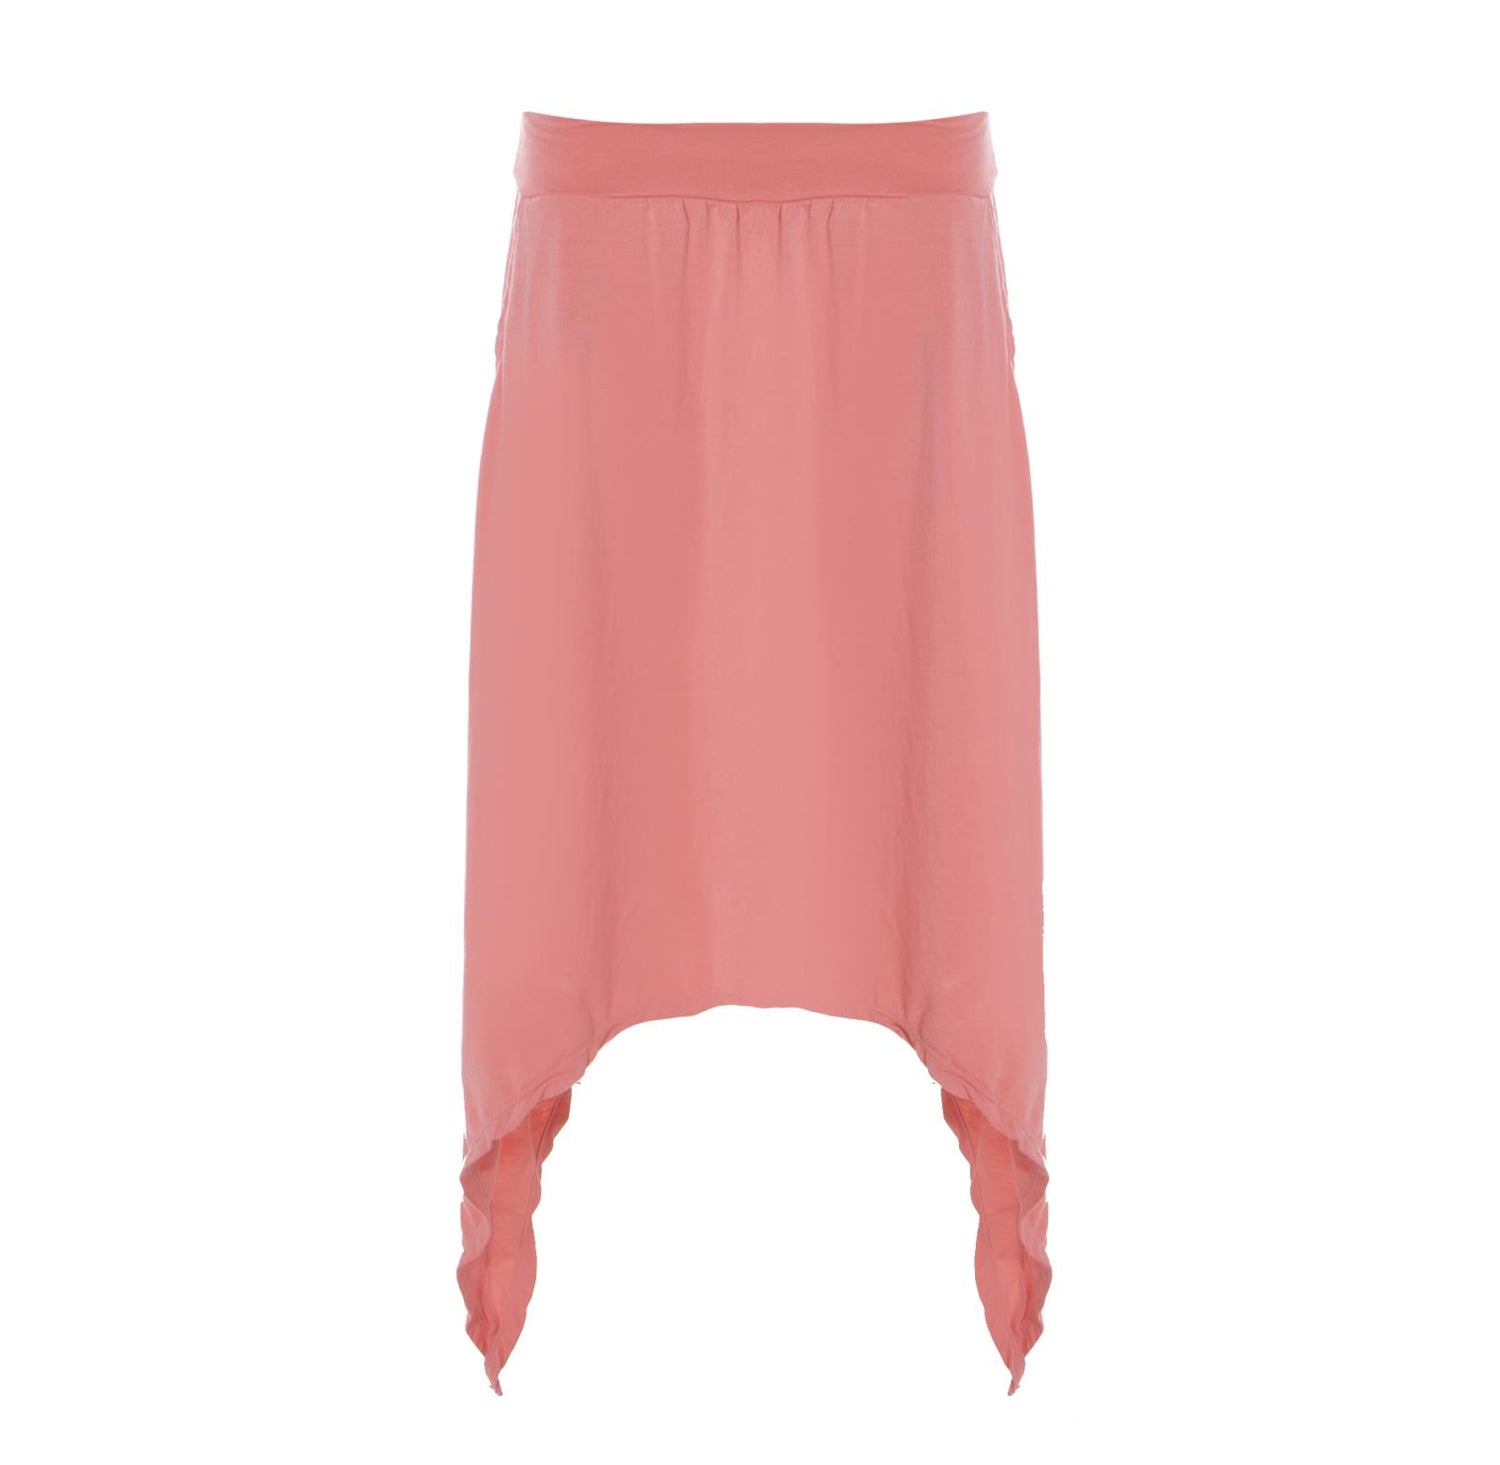 Women's Solid Side-Tailed Skirt in Strawberry